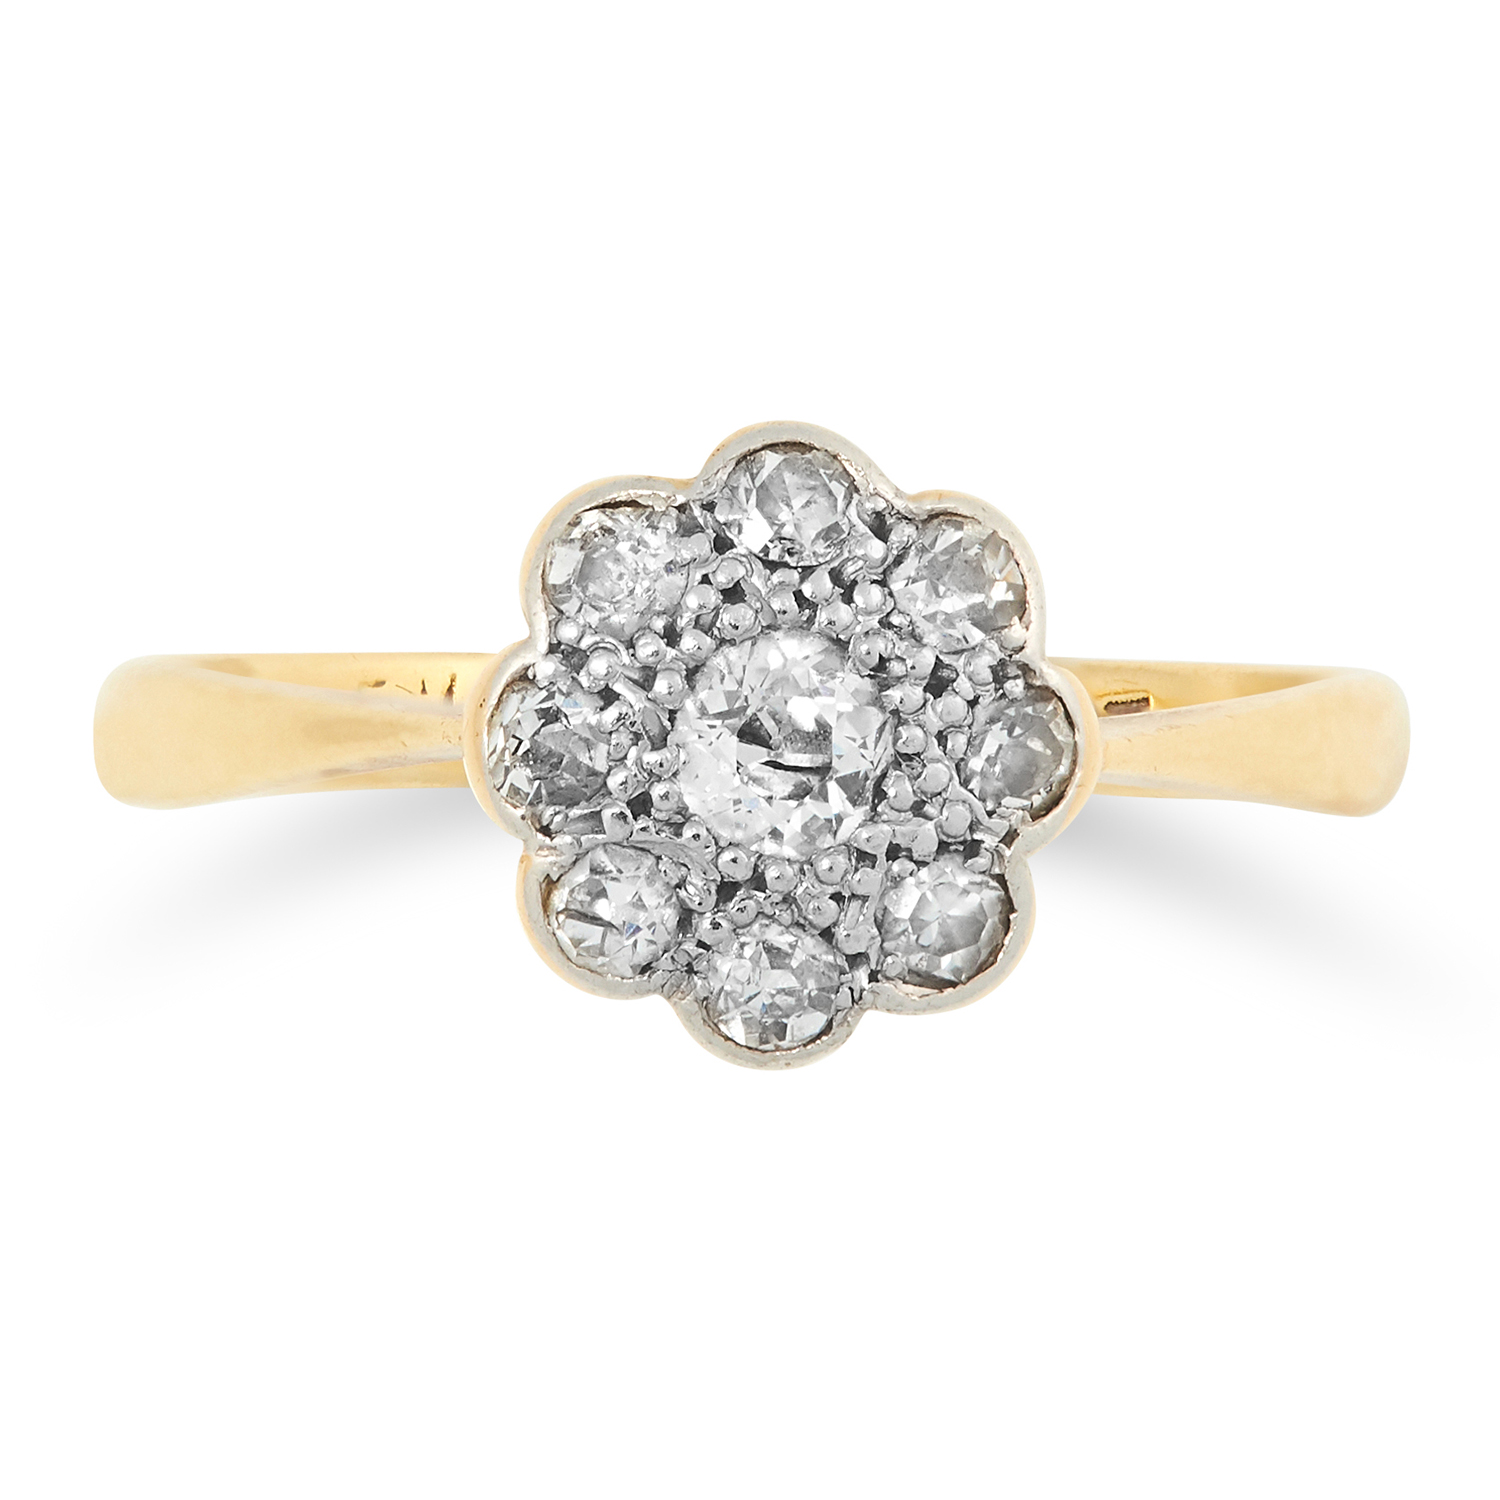 DIAMOND CLUSTER RING set with a cluster of round cut diamonds in floral design, size M / 6, 3.6g.